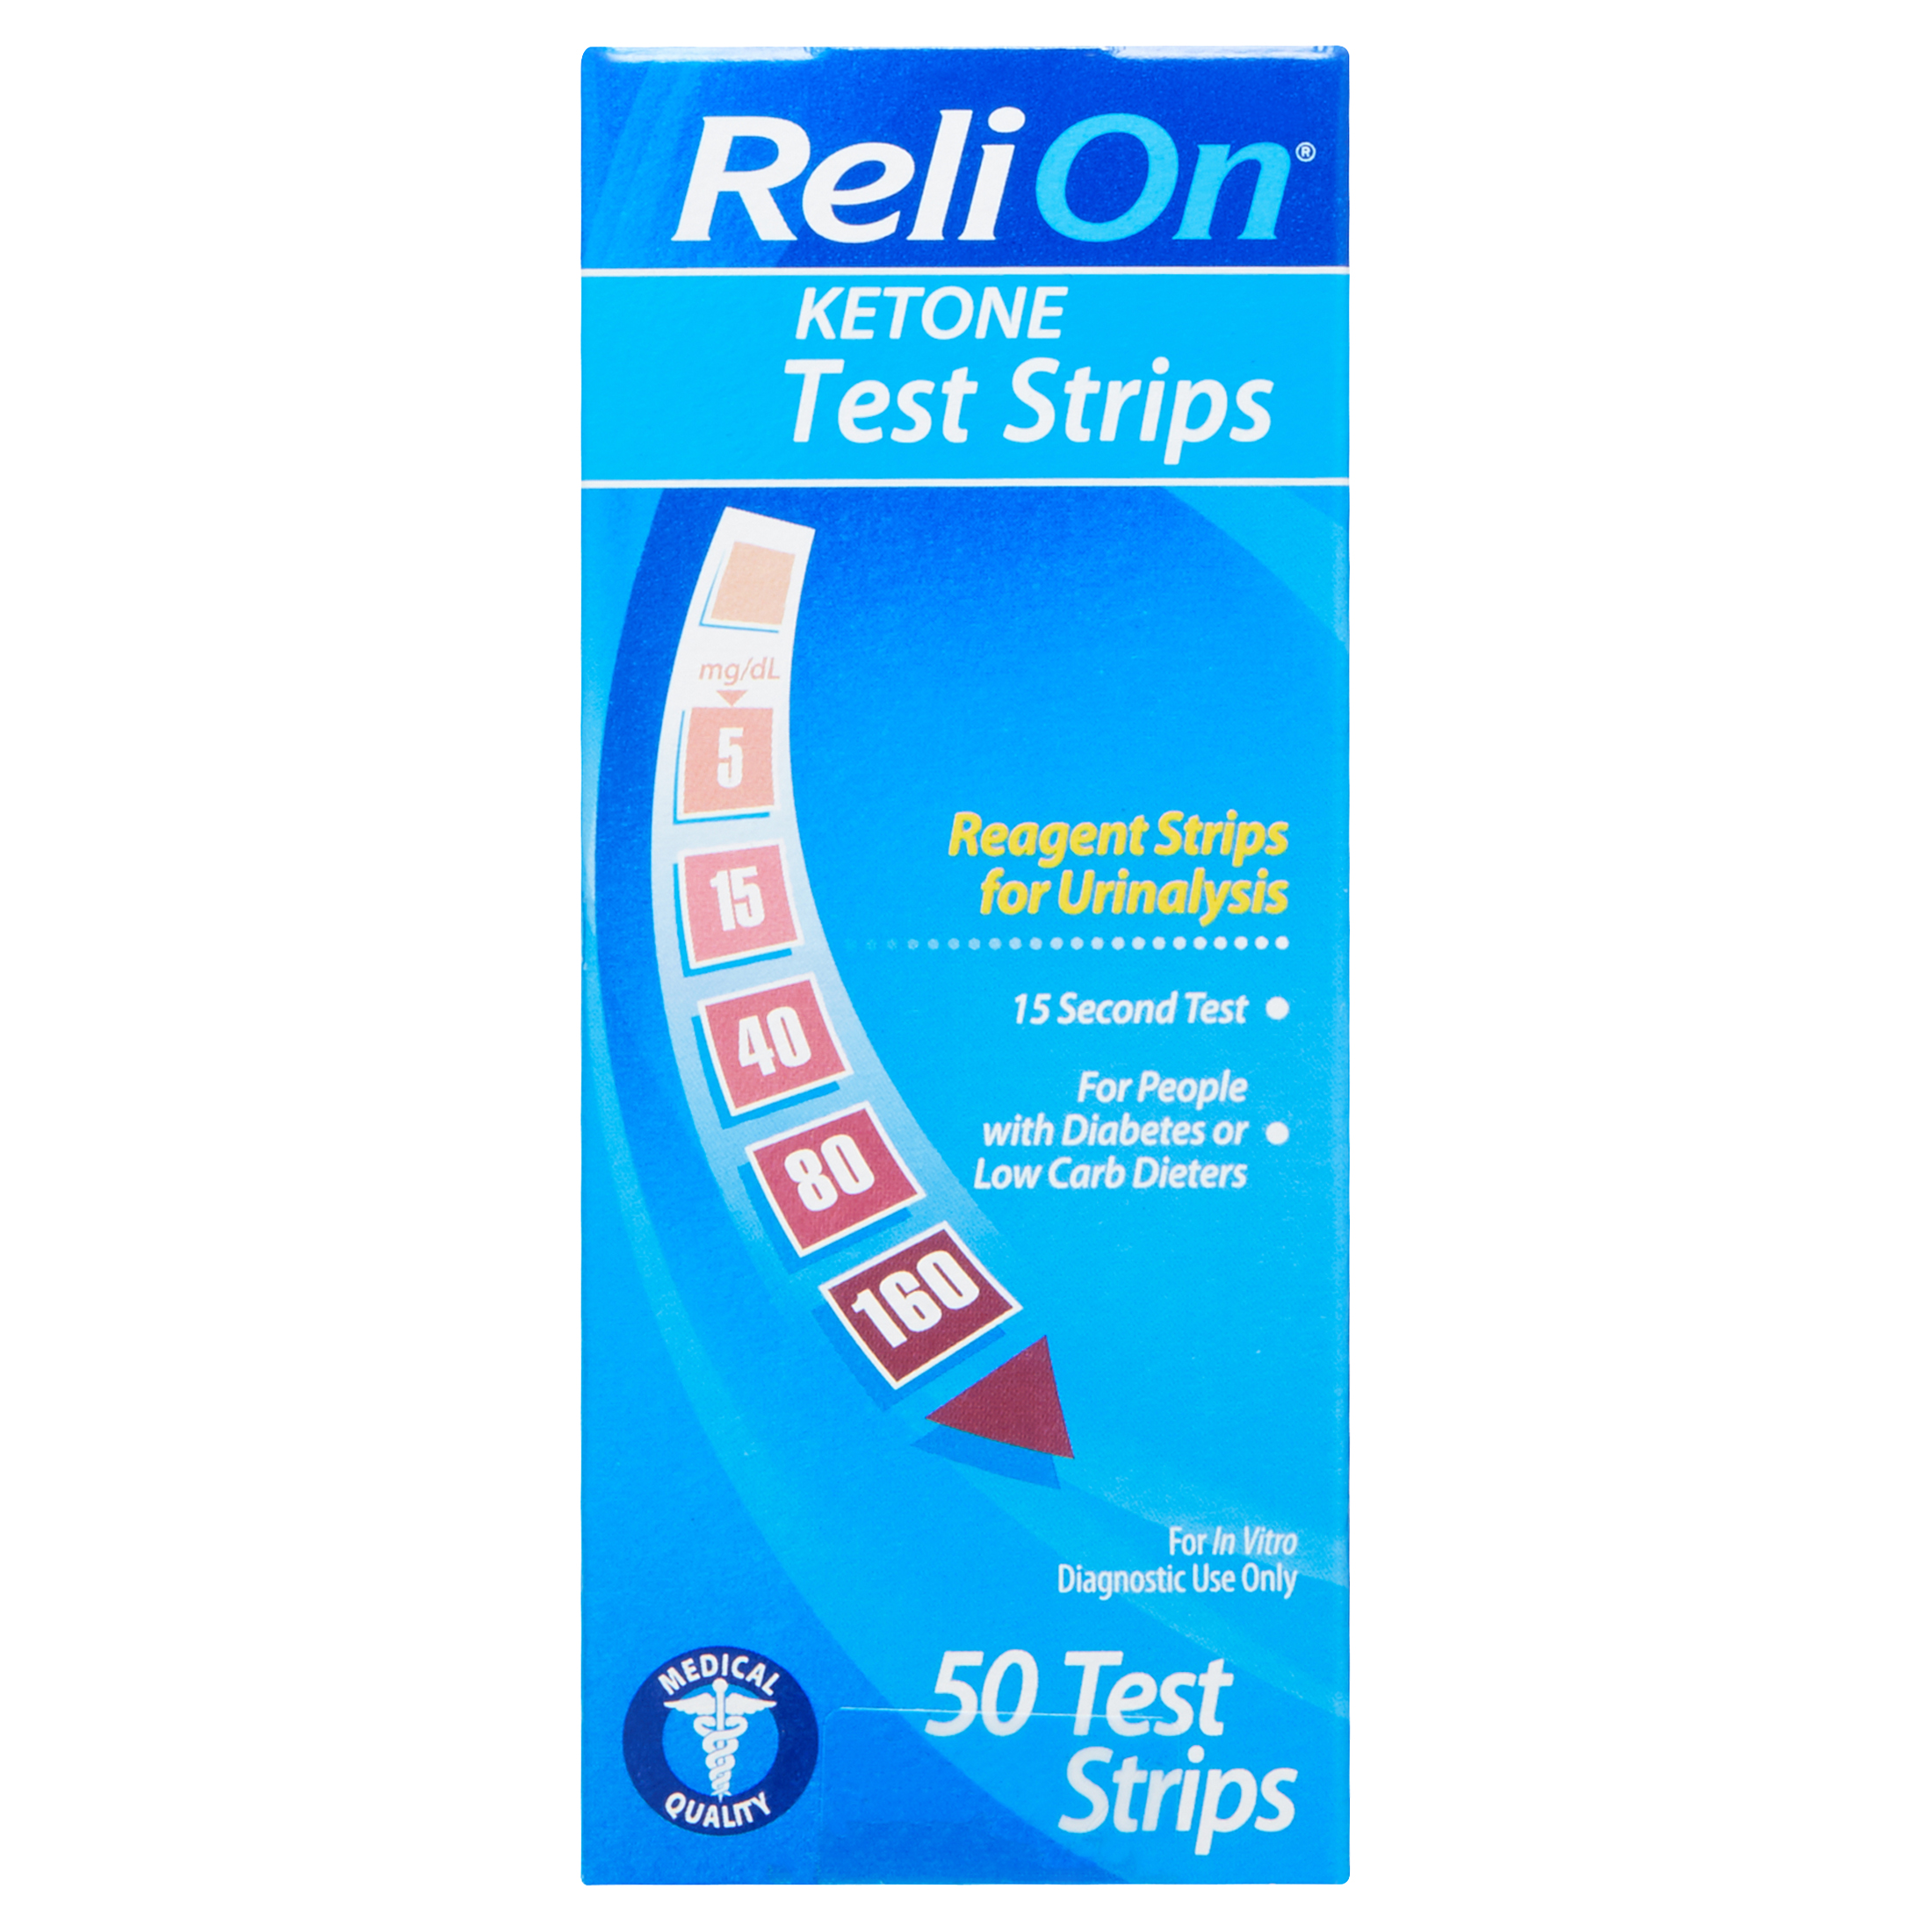 ReliOn Ketone Test Strips, 50 Count - image 1 of 7